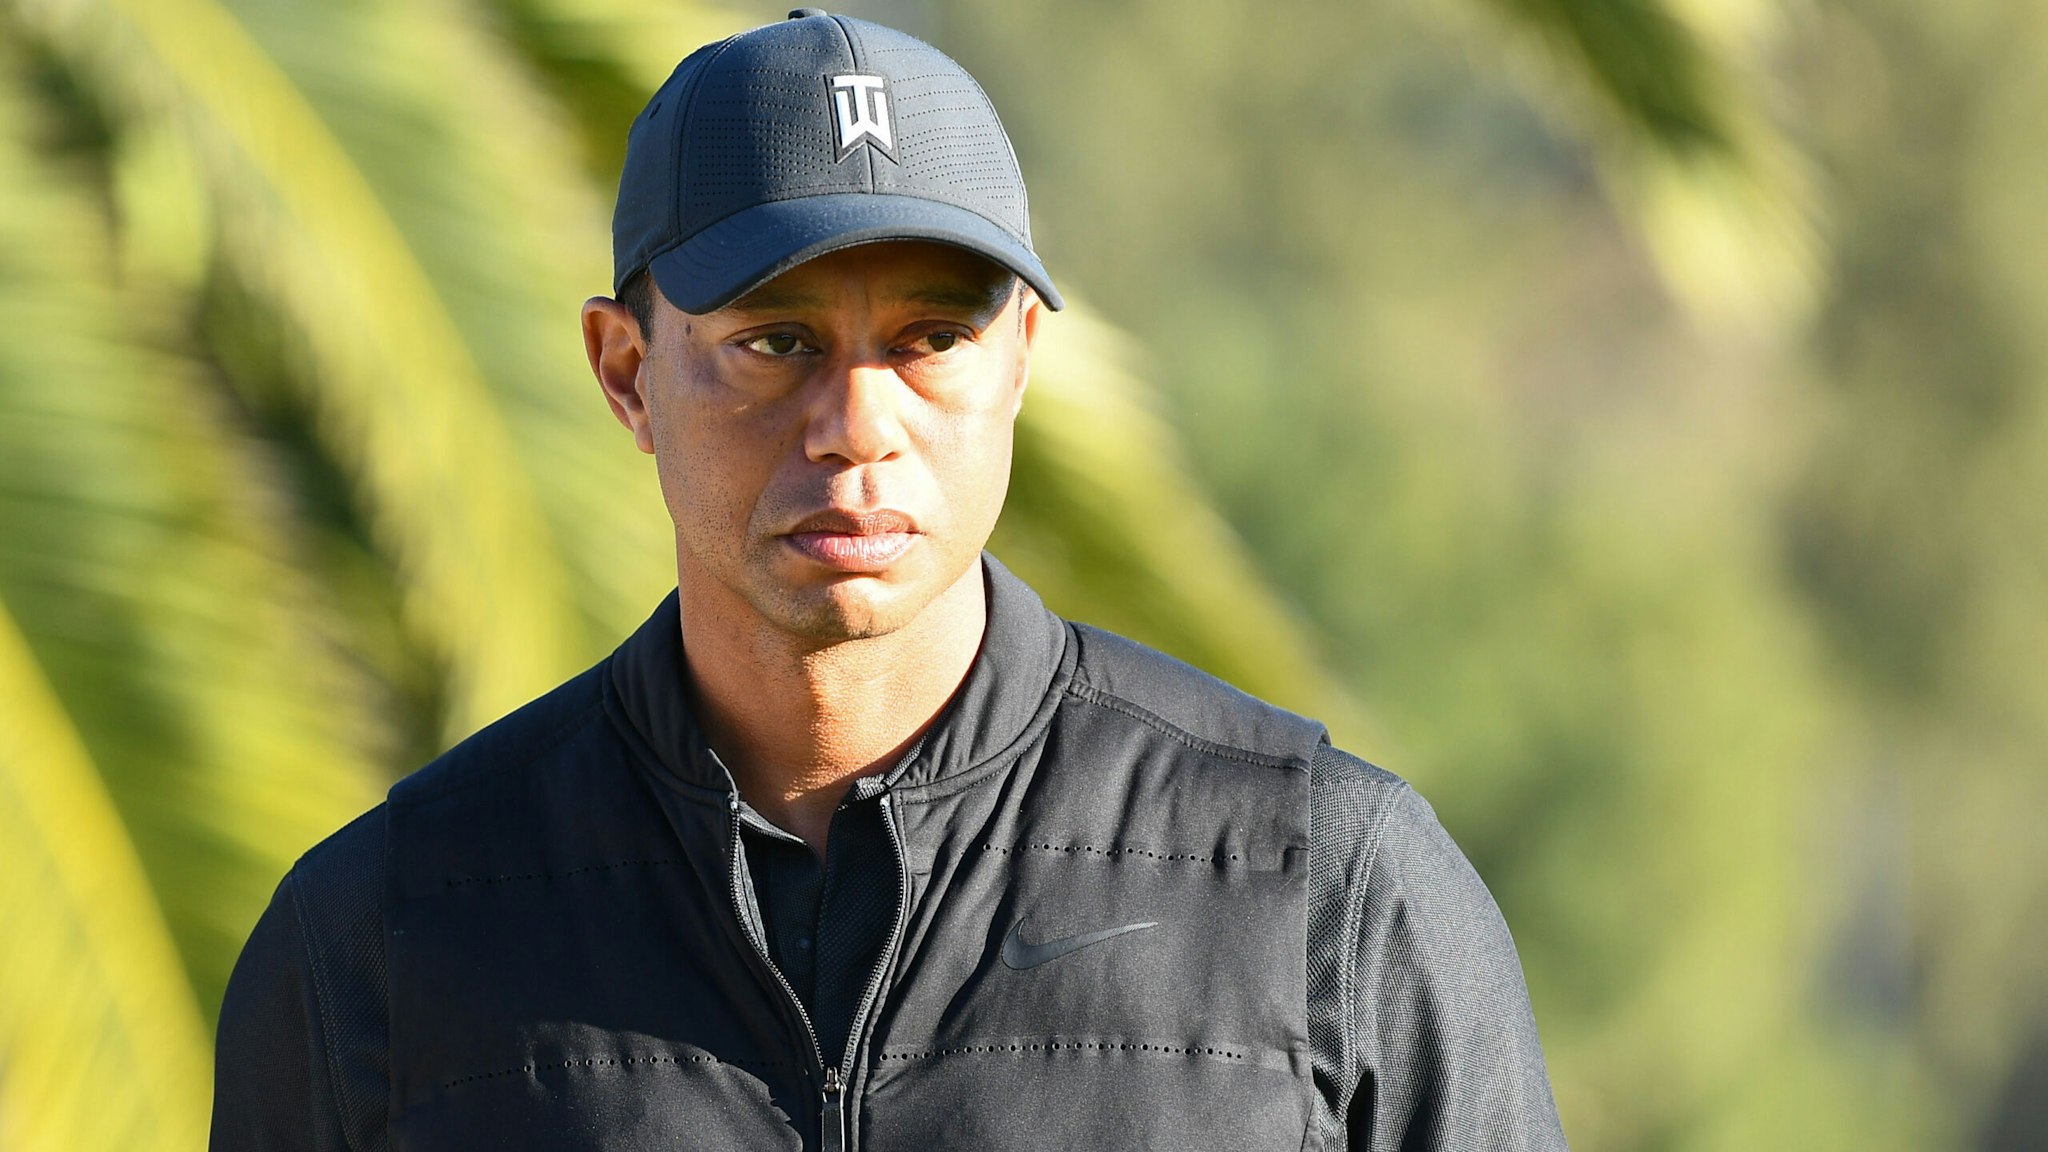 PACIFIC PALISADES, CA - FEBRUARY 21: Tiger Woods looks on from the 18th hole during the final round of The Genesis Invitational golf tournament at the Riviera Country Club in Pacific Palisades, CA on February 21, 2021. The tournament was played without fans due to the COVID-19 pandemi